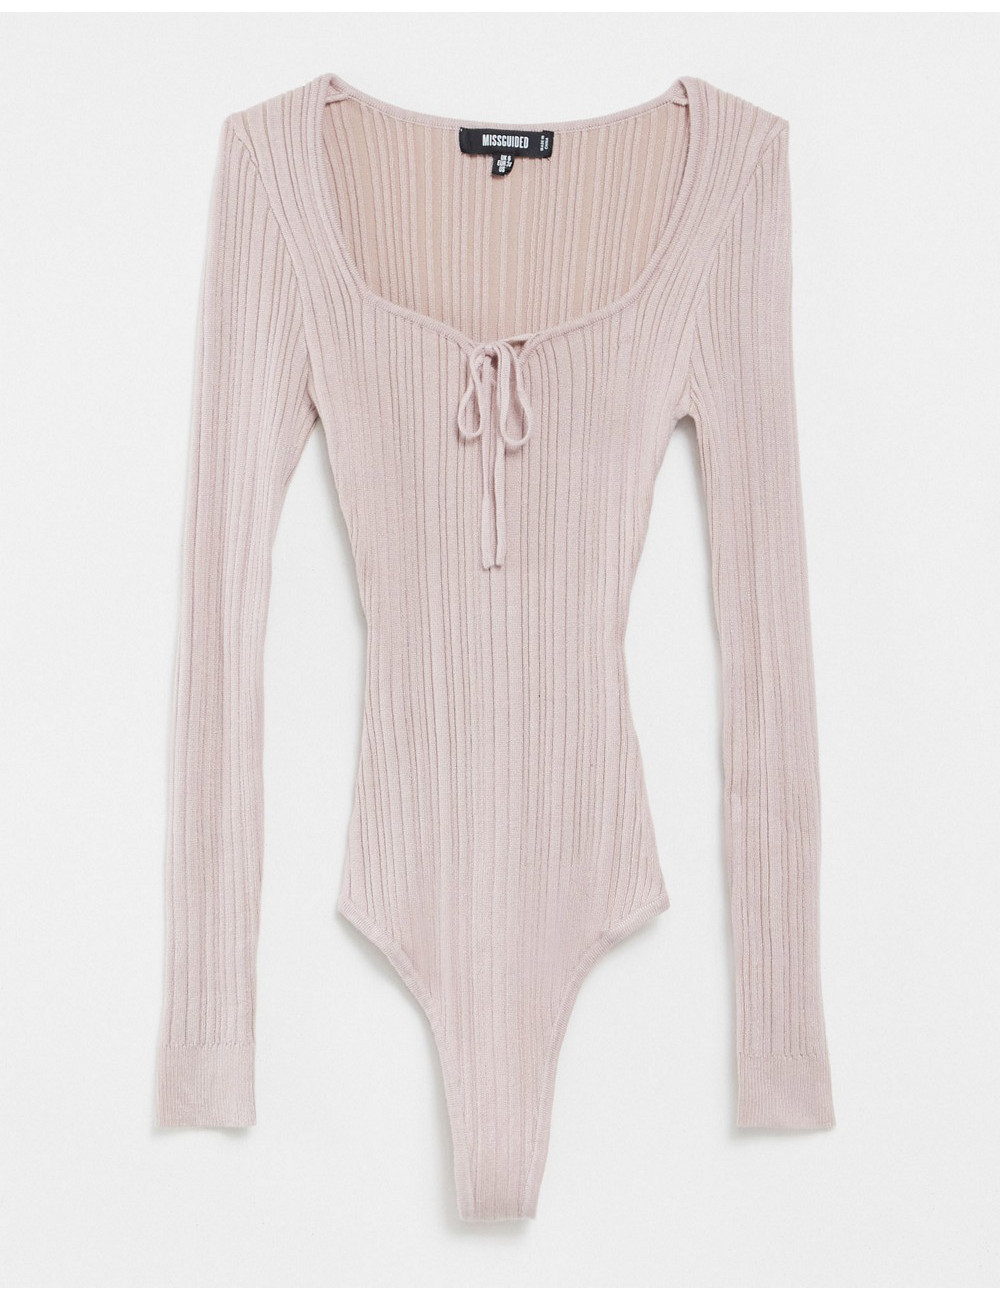 Missguided knitted bodysuit...